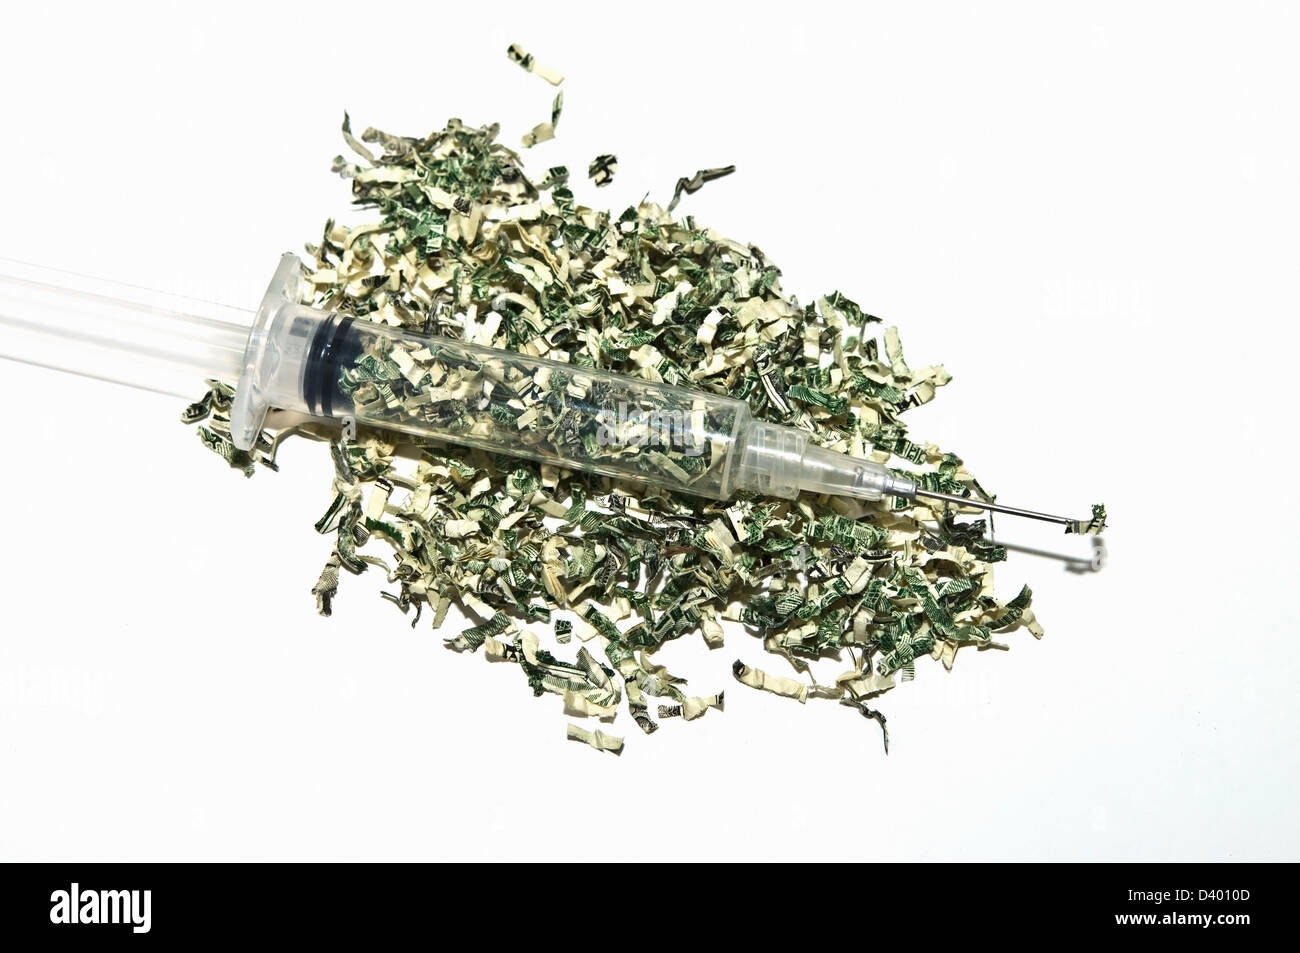 Shredded money with a syringe full. Concept or metaphor for cost of drugs, health, wasting money on drugs, medical plans, etc. Stock Photo